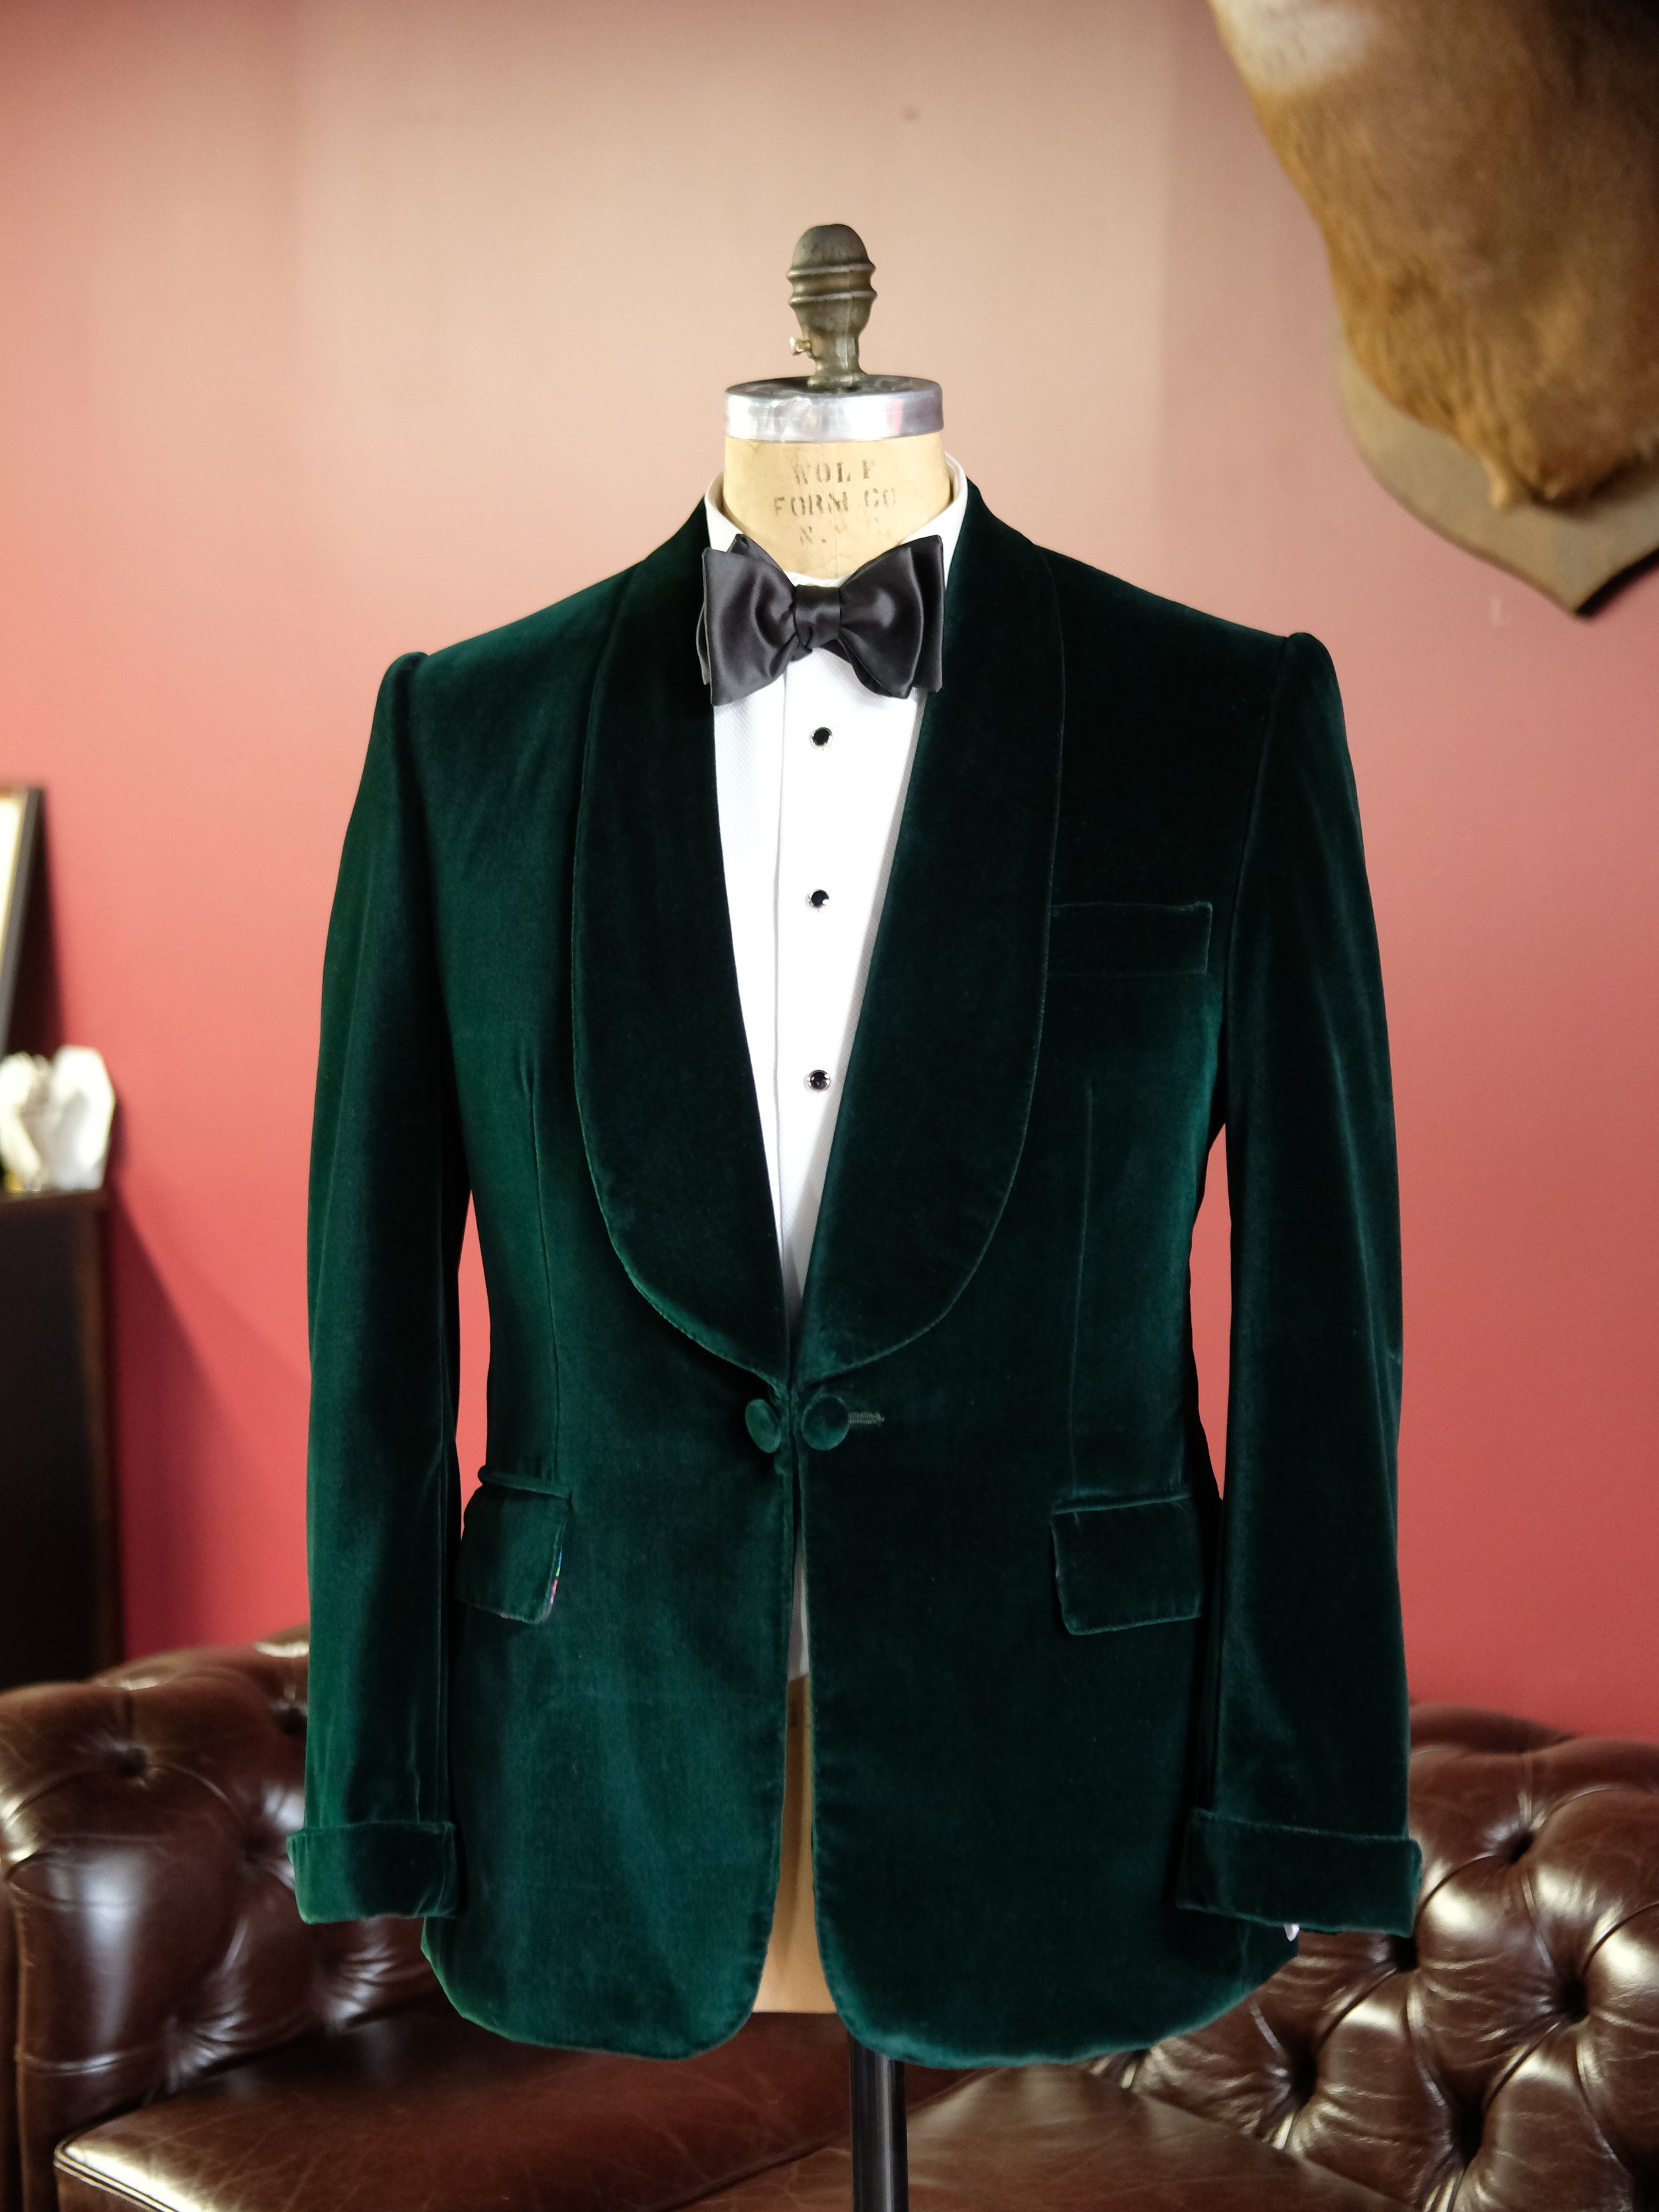 Find a Bespoke Tailor in NYC Near Me - TIEFENBRUN